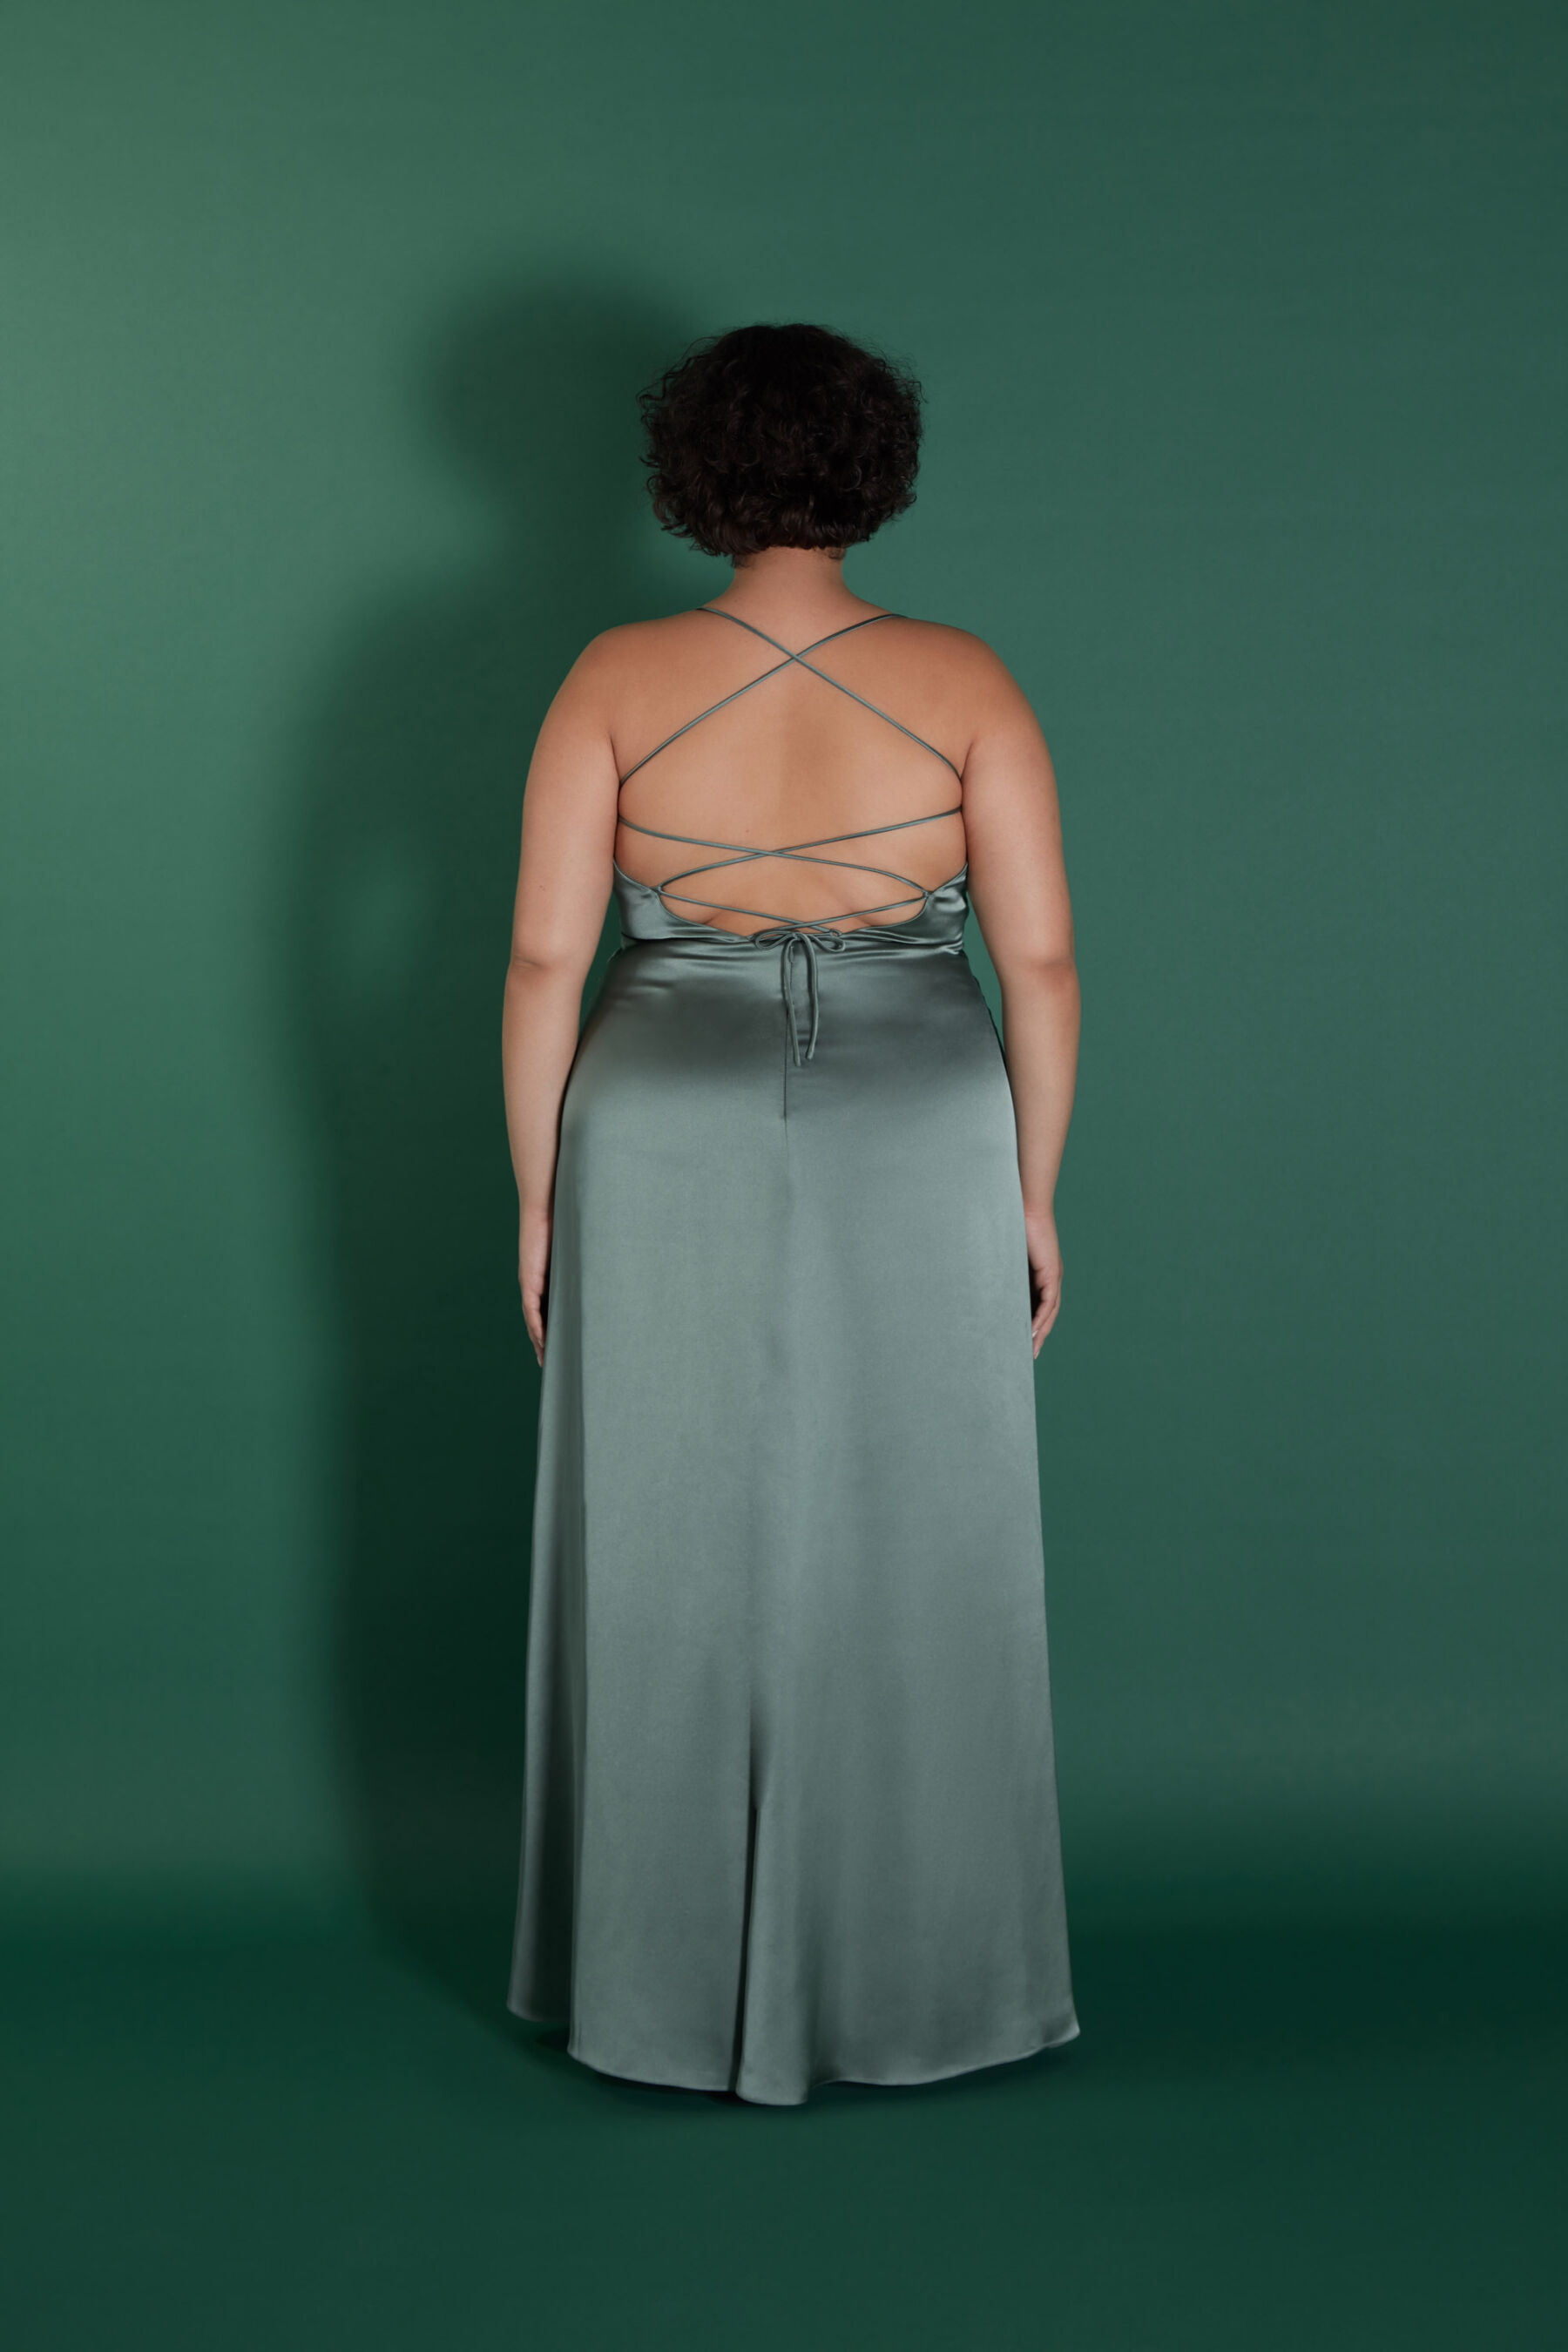 Size inclusive bridesmaids dresses by Halfpenny London